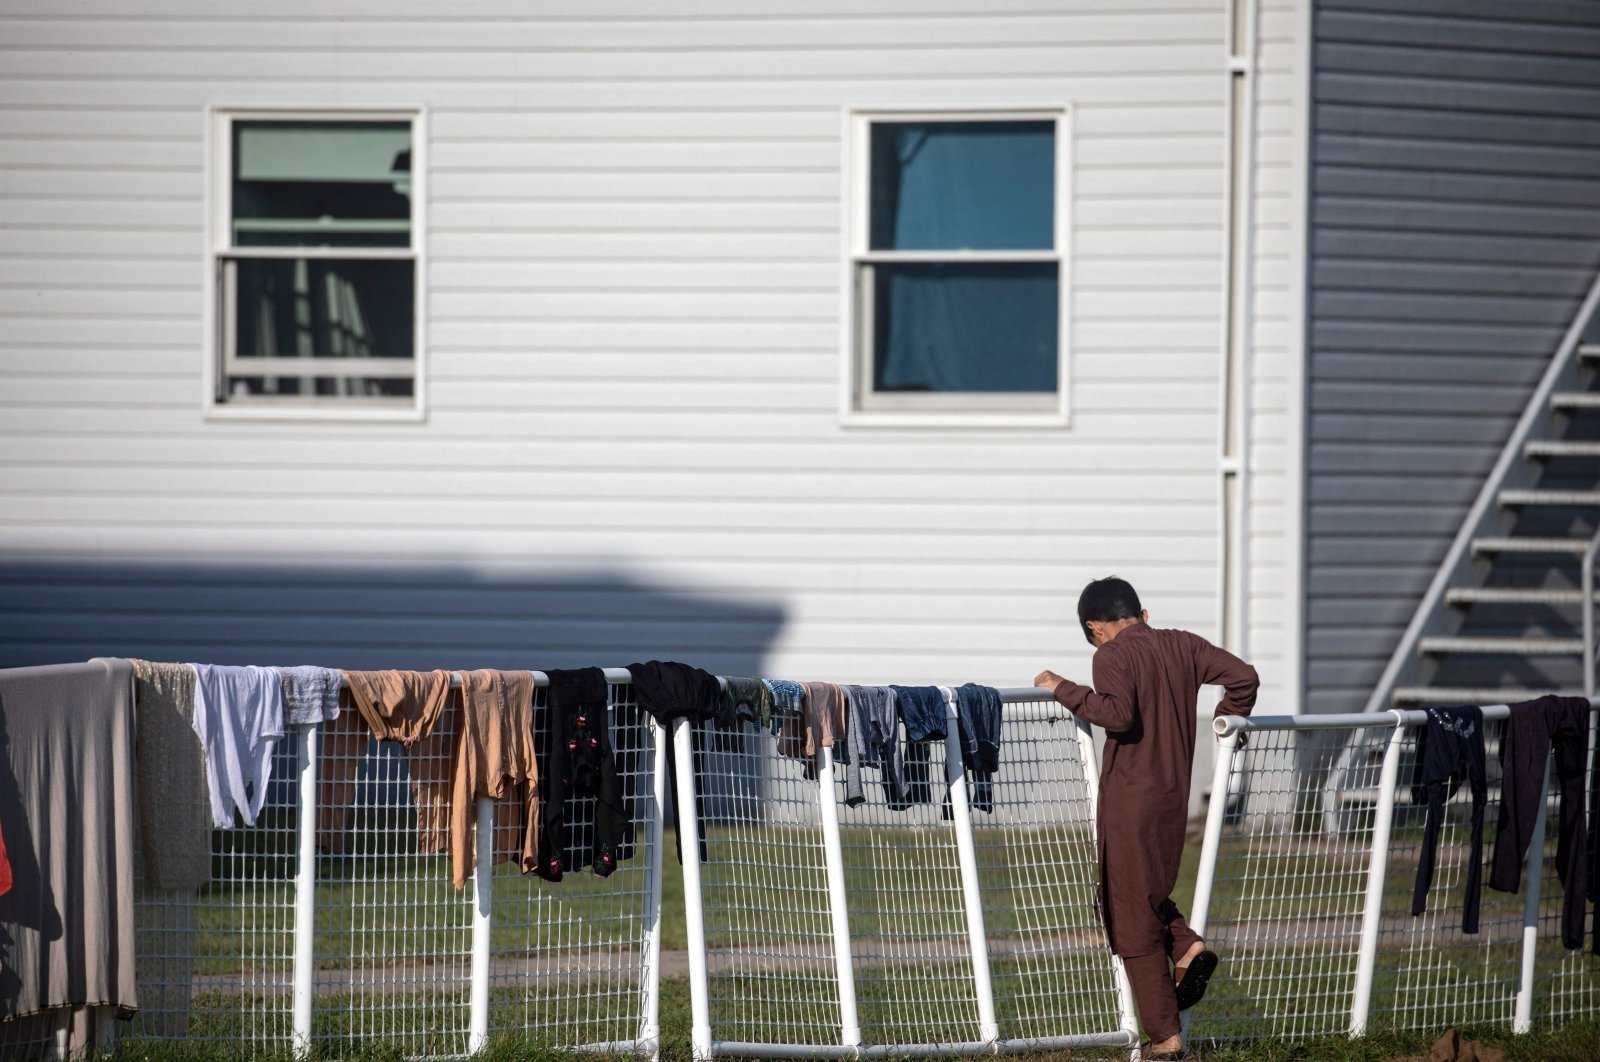 An Afghan refugee stands outside temporary housing at Ft. McCoy U.S. Army base, Sept. 30, 2021, Wisconsin, U.S. (AFP Photo)